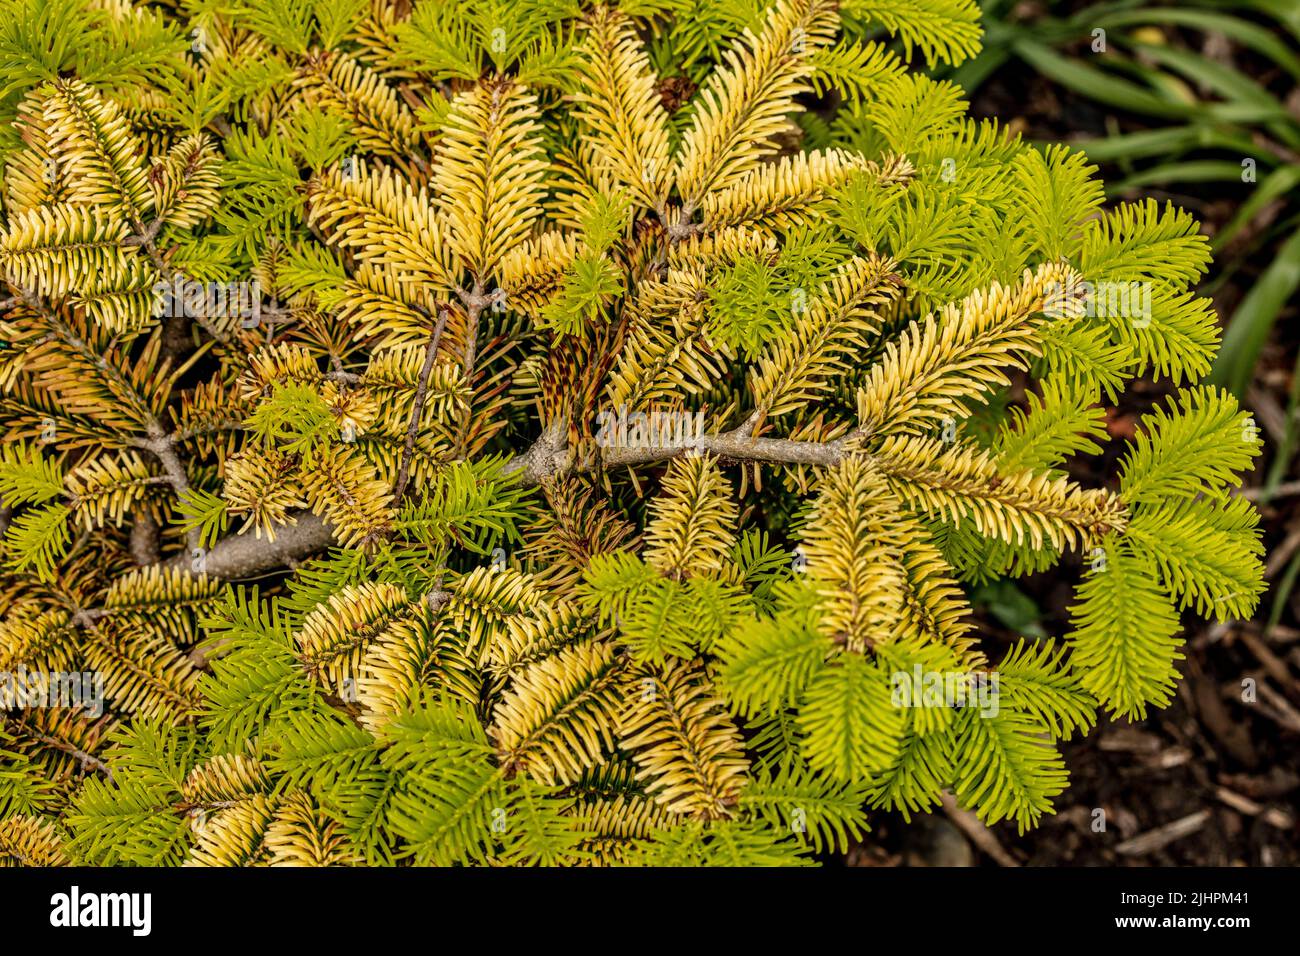 Intriguing Abies Nordmanniana sub  Nordmanniana ‘Golden Spreader’, natural close up showing pattern and texture in the environment Stock Photo